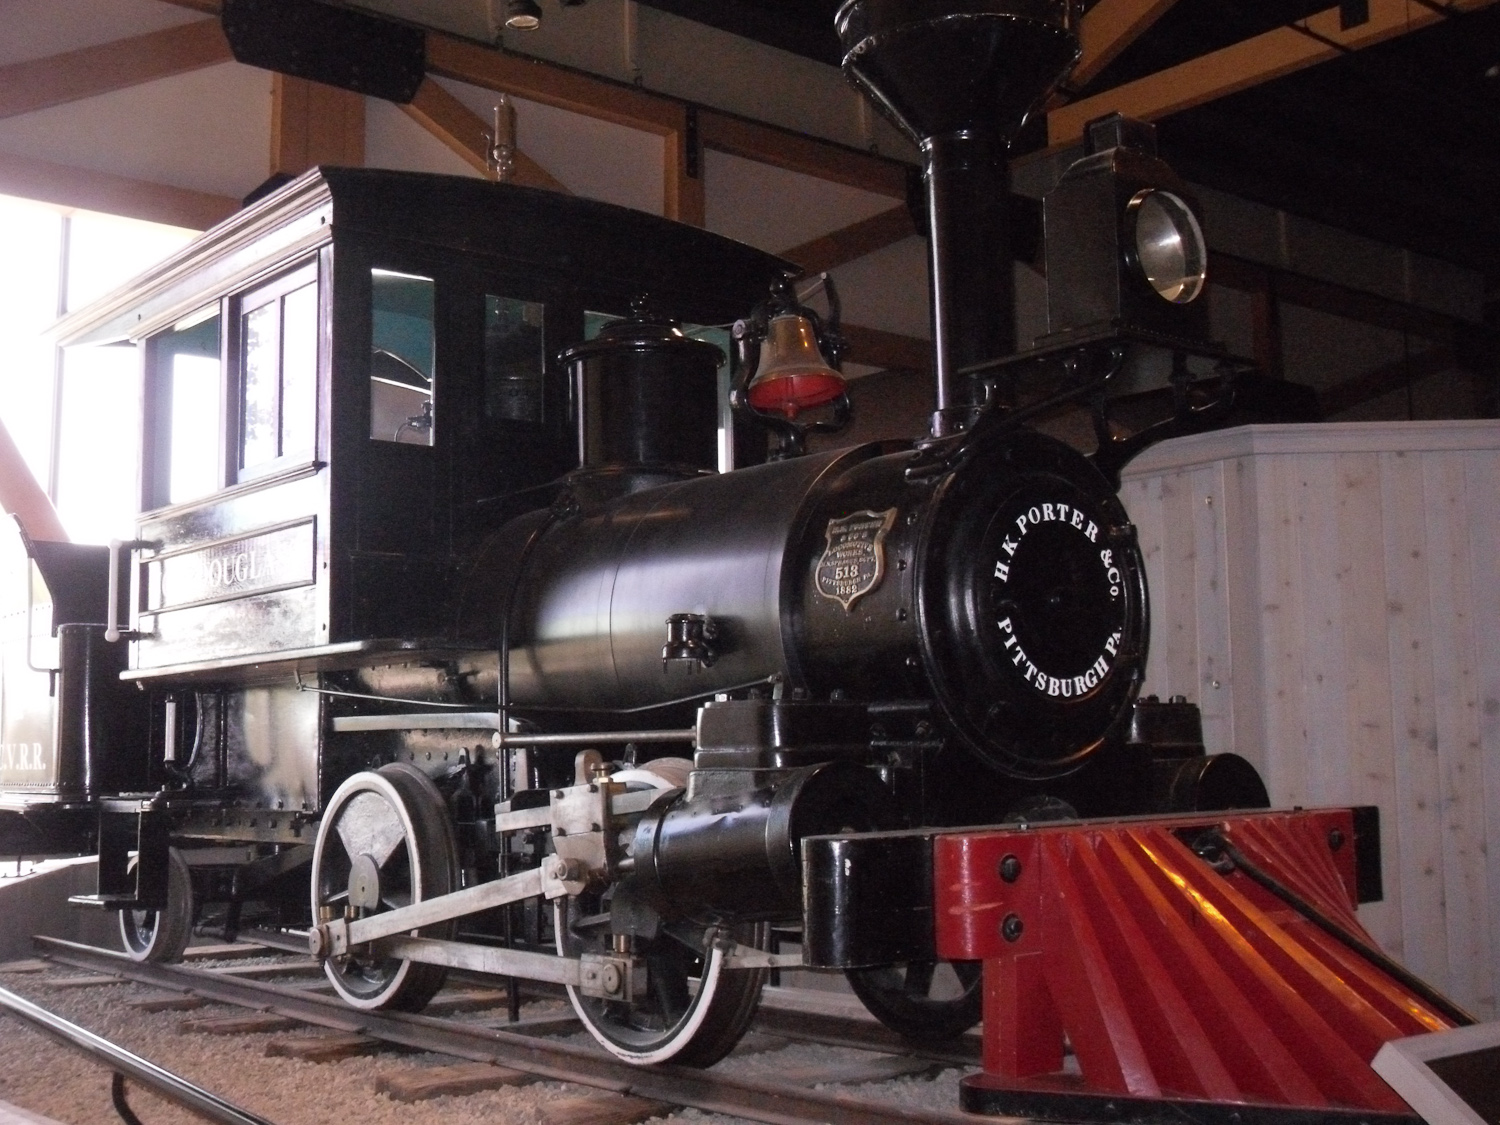 The Joe Douglass narrow gauge engine used for hauling ore from Carson Valley mill sites to Dayton and Sutro.